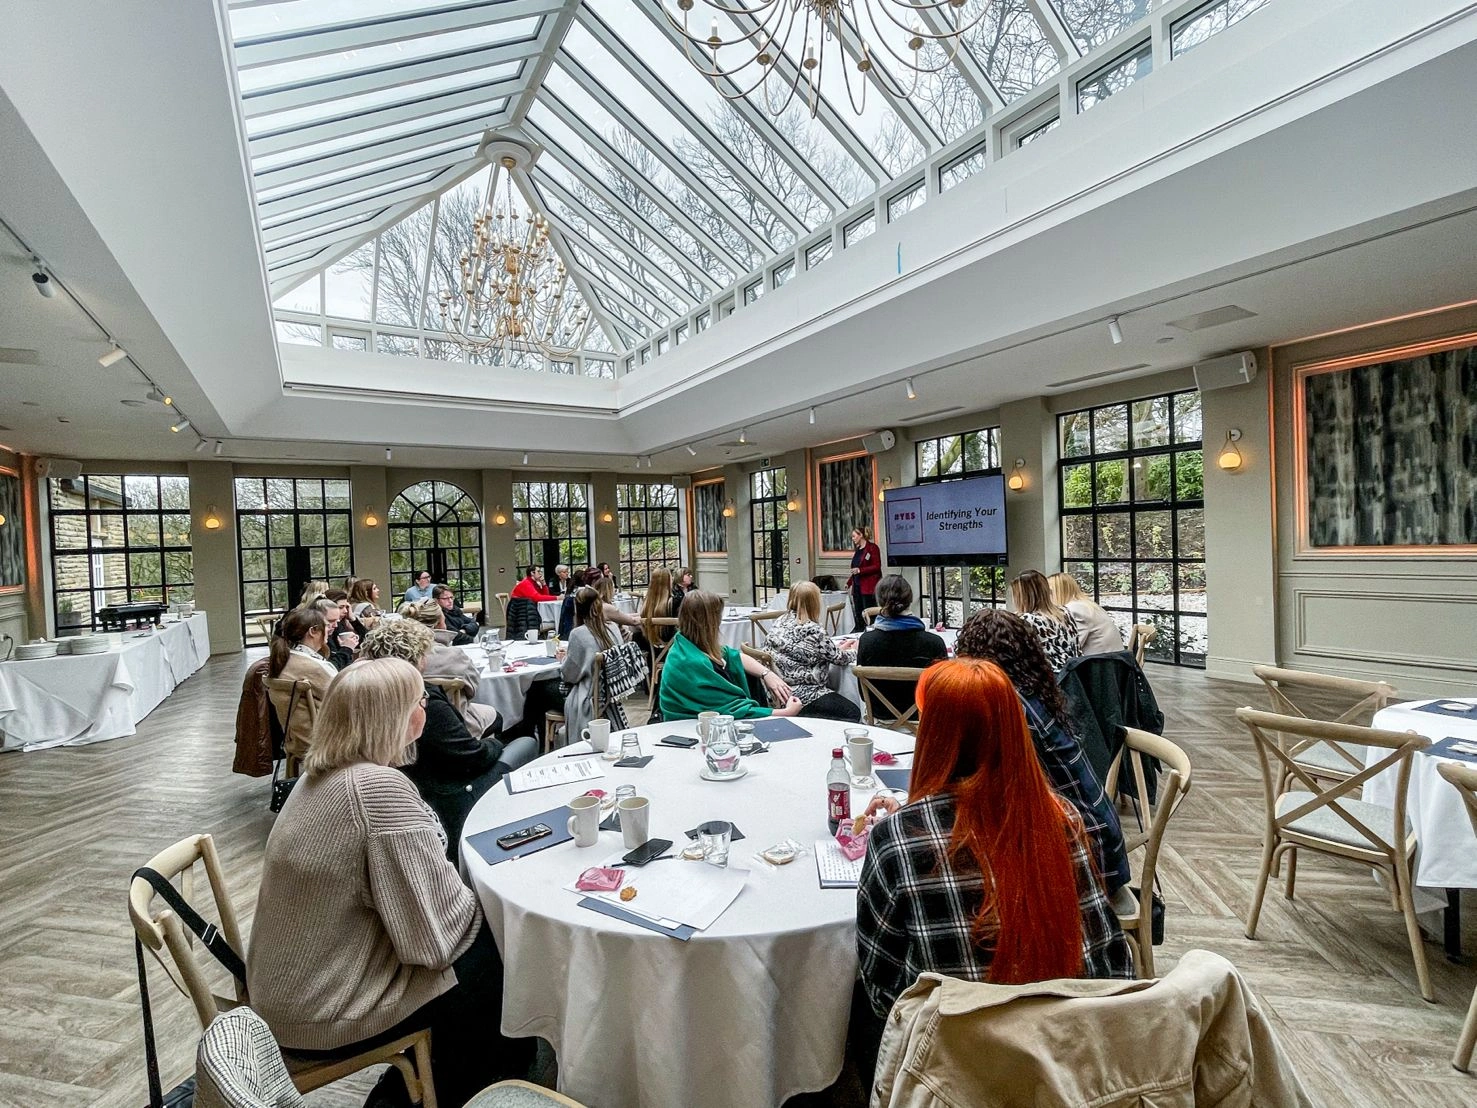 A room full of tables and chairs with women attending the women's day network event ran by Howarth, an event to celebrate and empower the women within the business.